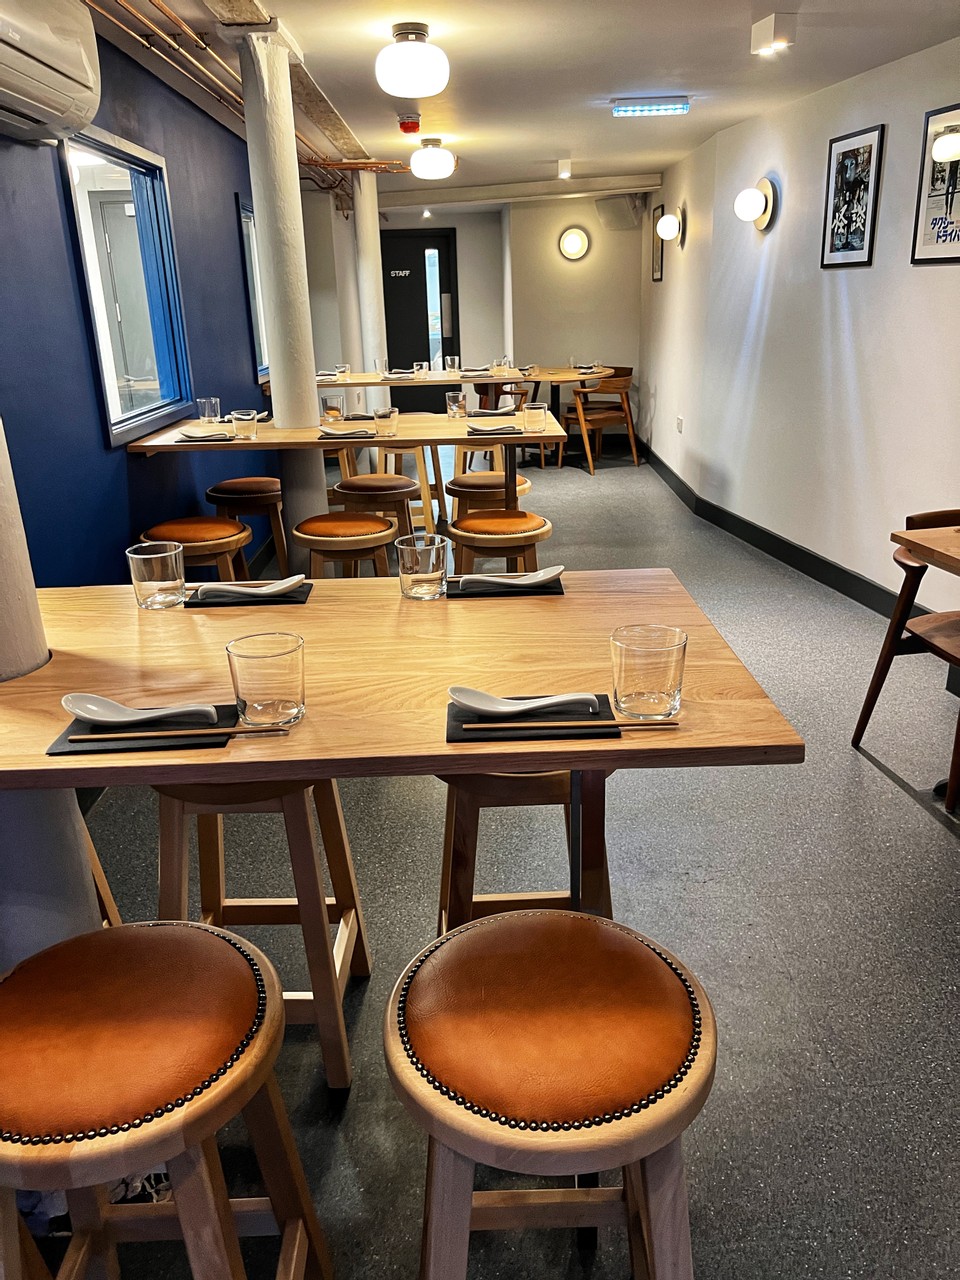 New Wave Ramen has opened a new restaurant space in Manchester. Credit: The Manc Group